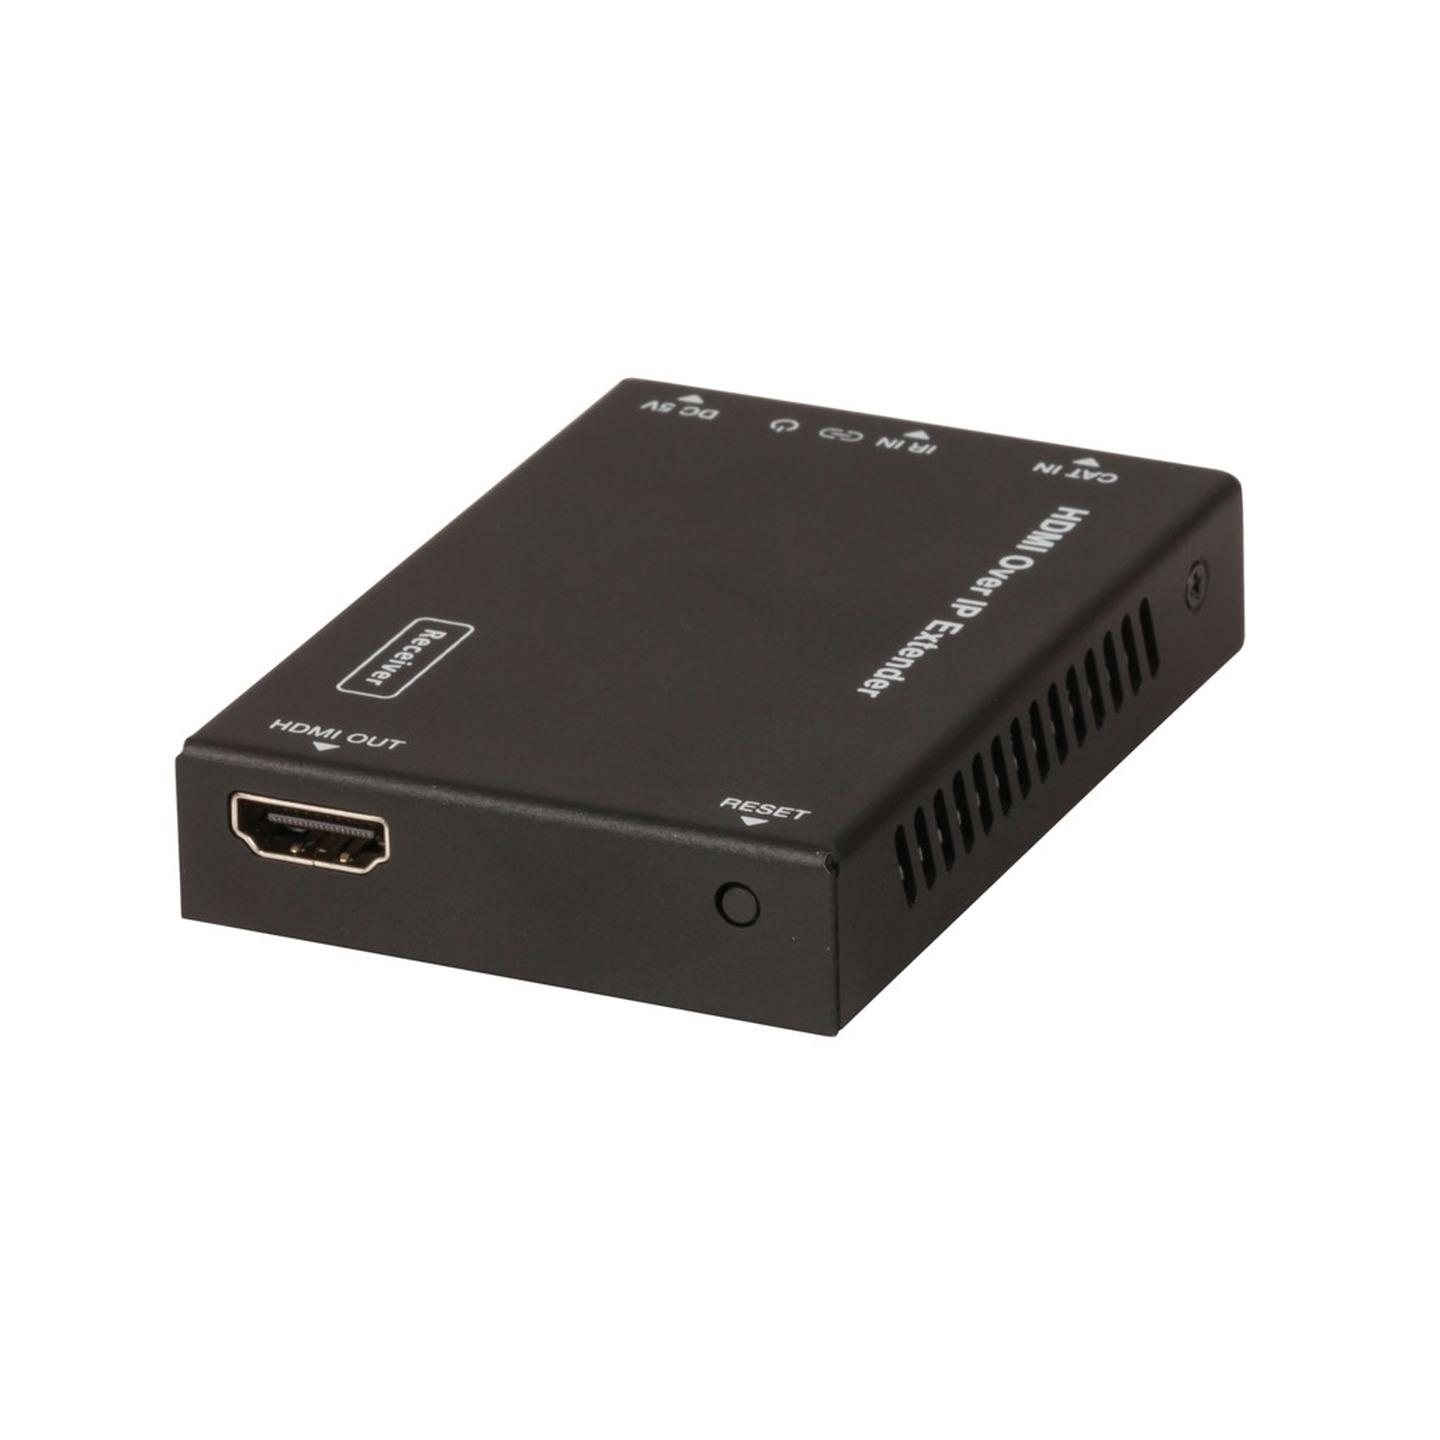 Digitech Spare HDMI Over IP Receiver V2 to suit AC1752